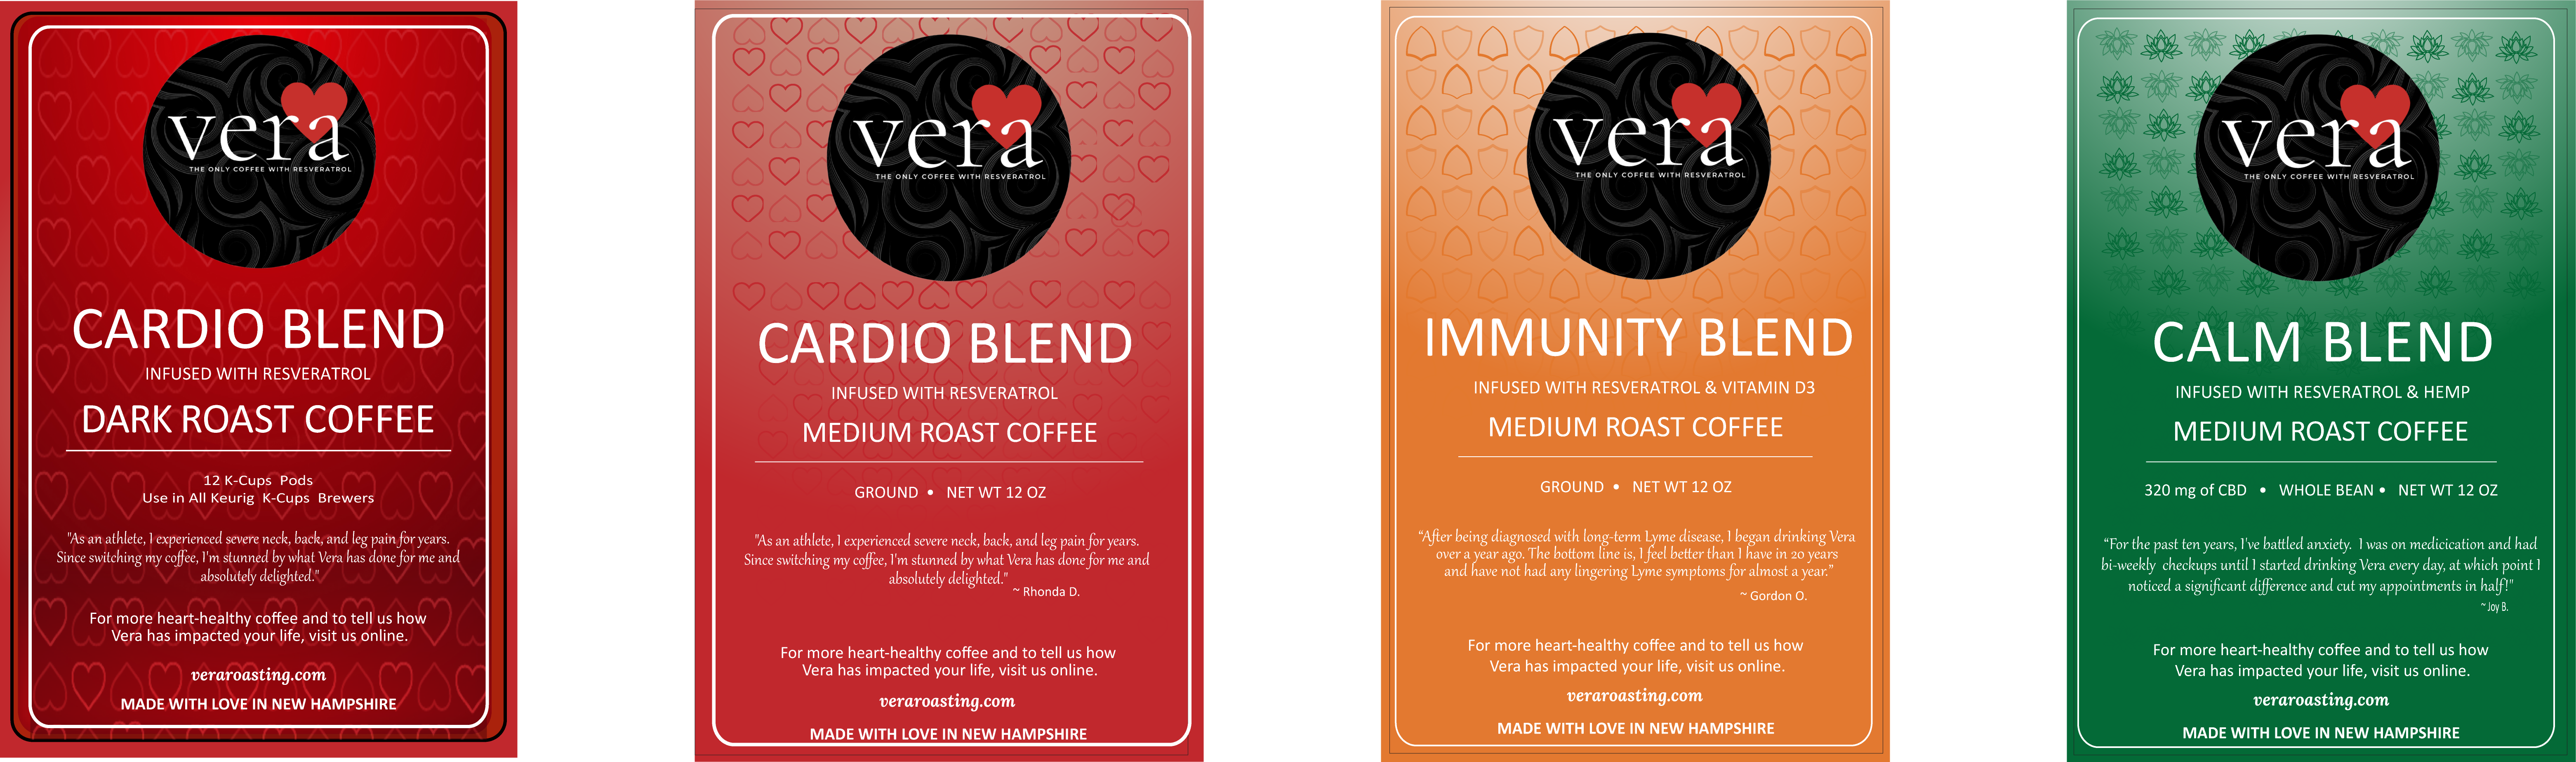 vera roasting, The only coffee made with resveratrol, dover, new hampshire, nh, coffee, health benefits